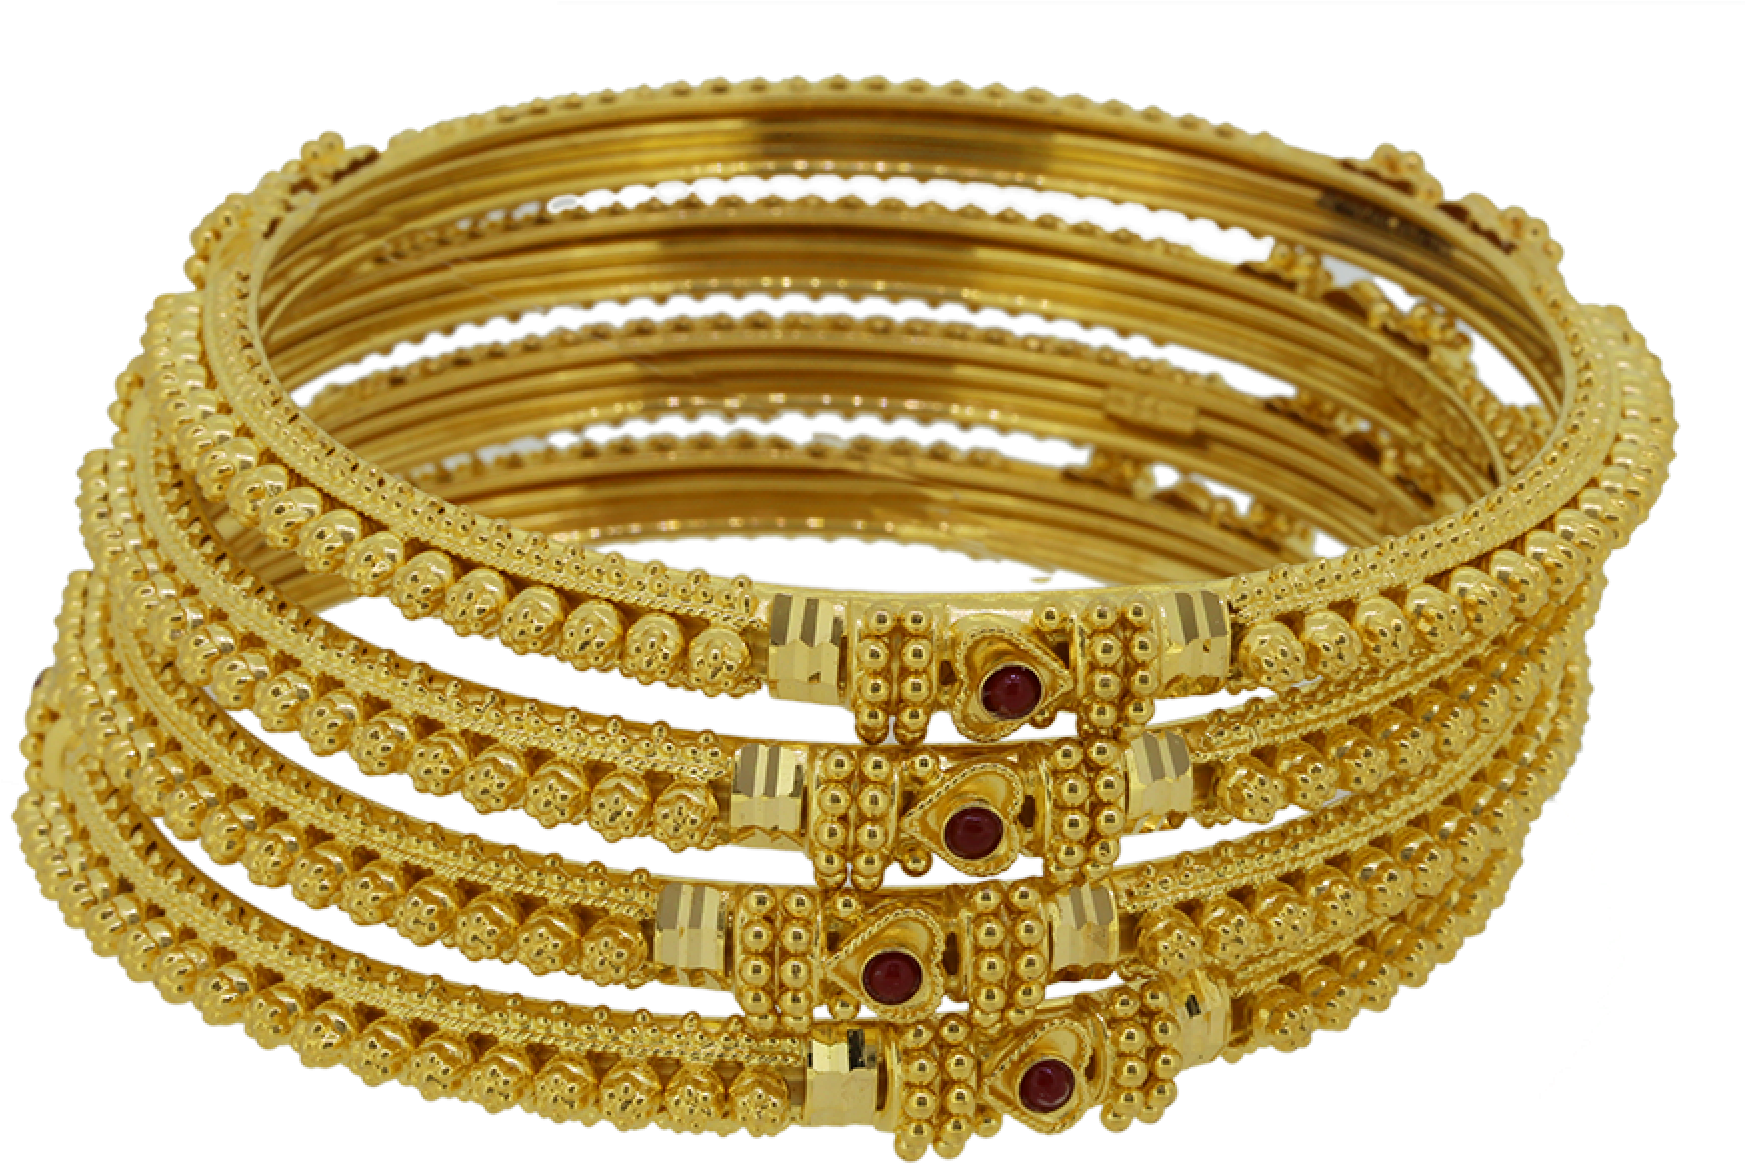 A Gold Bracelets With Red Stones